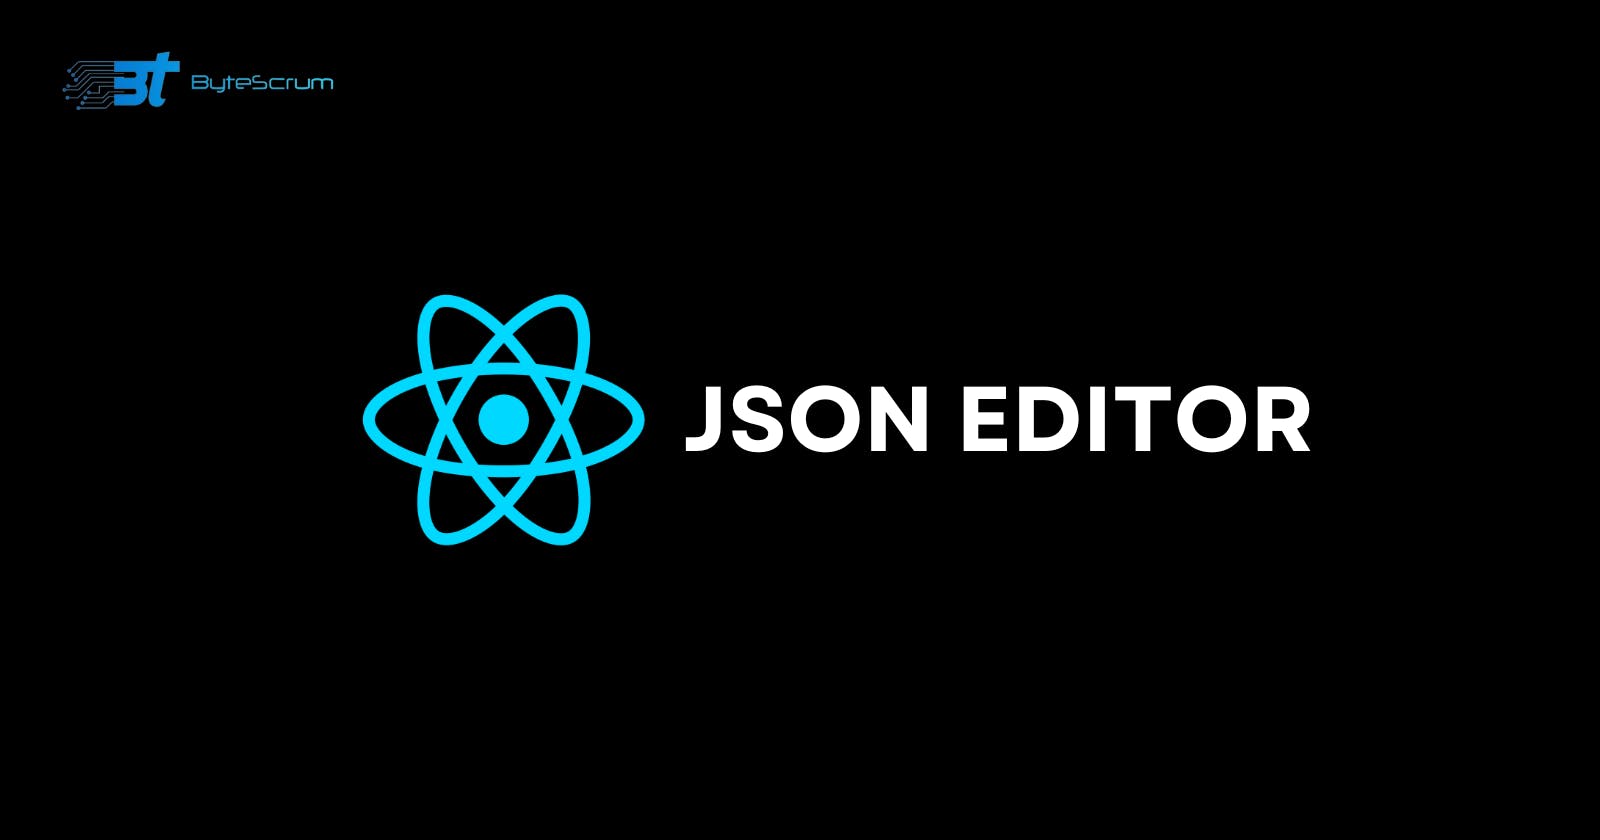 How to Use JSONEditor in a React App